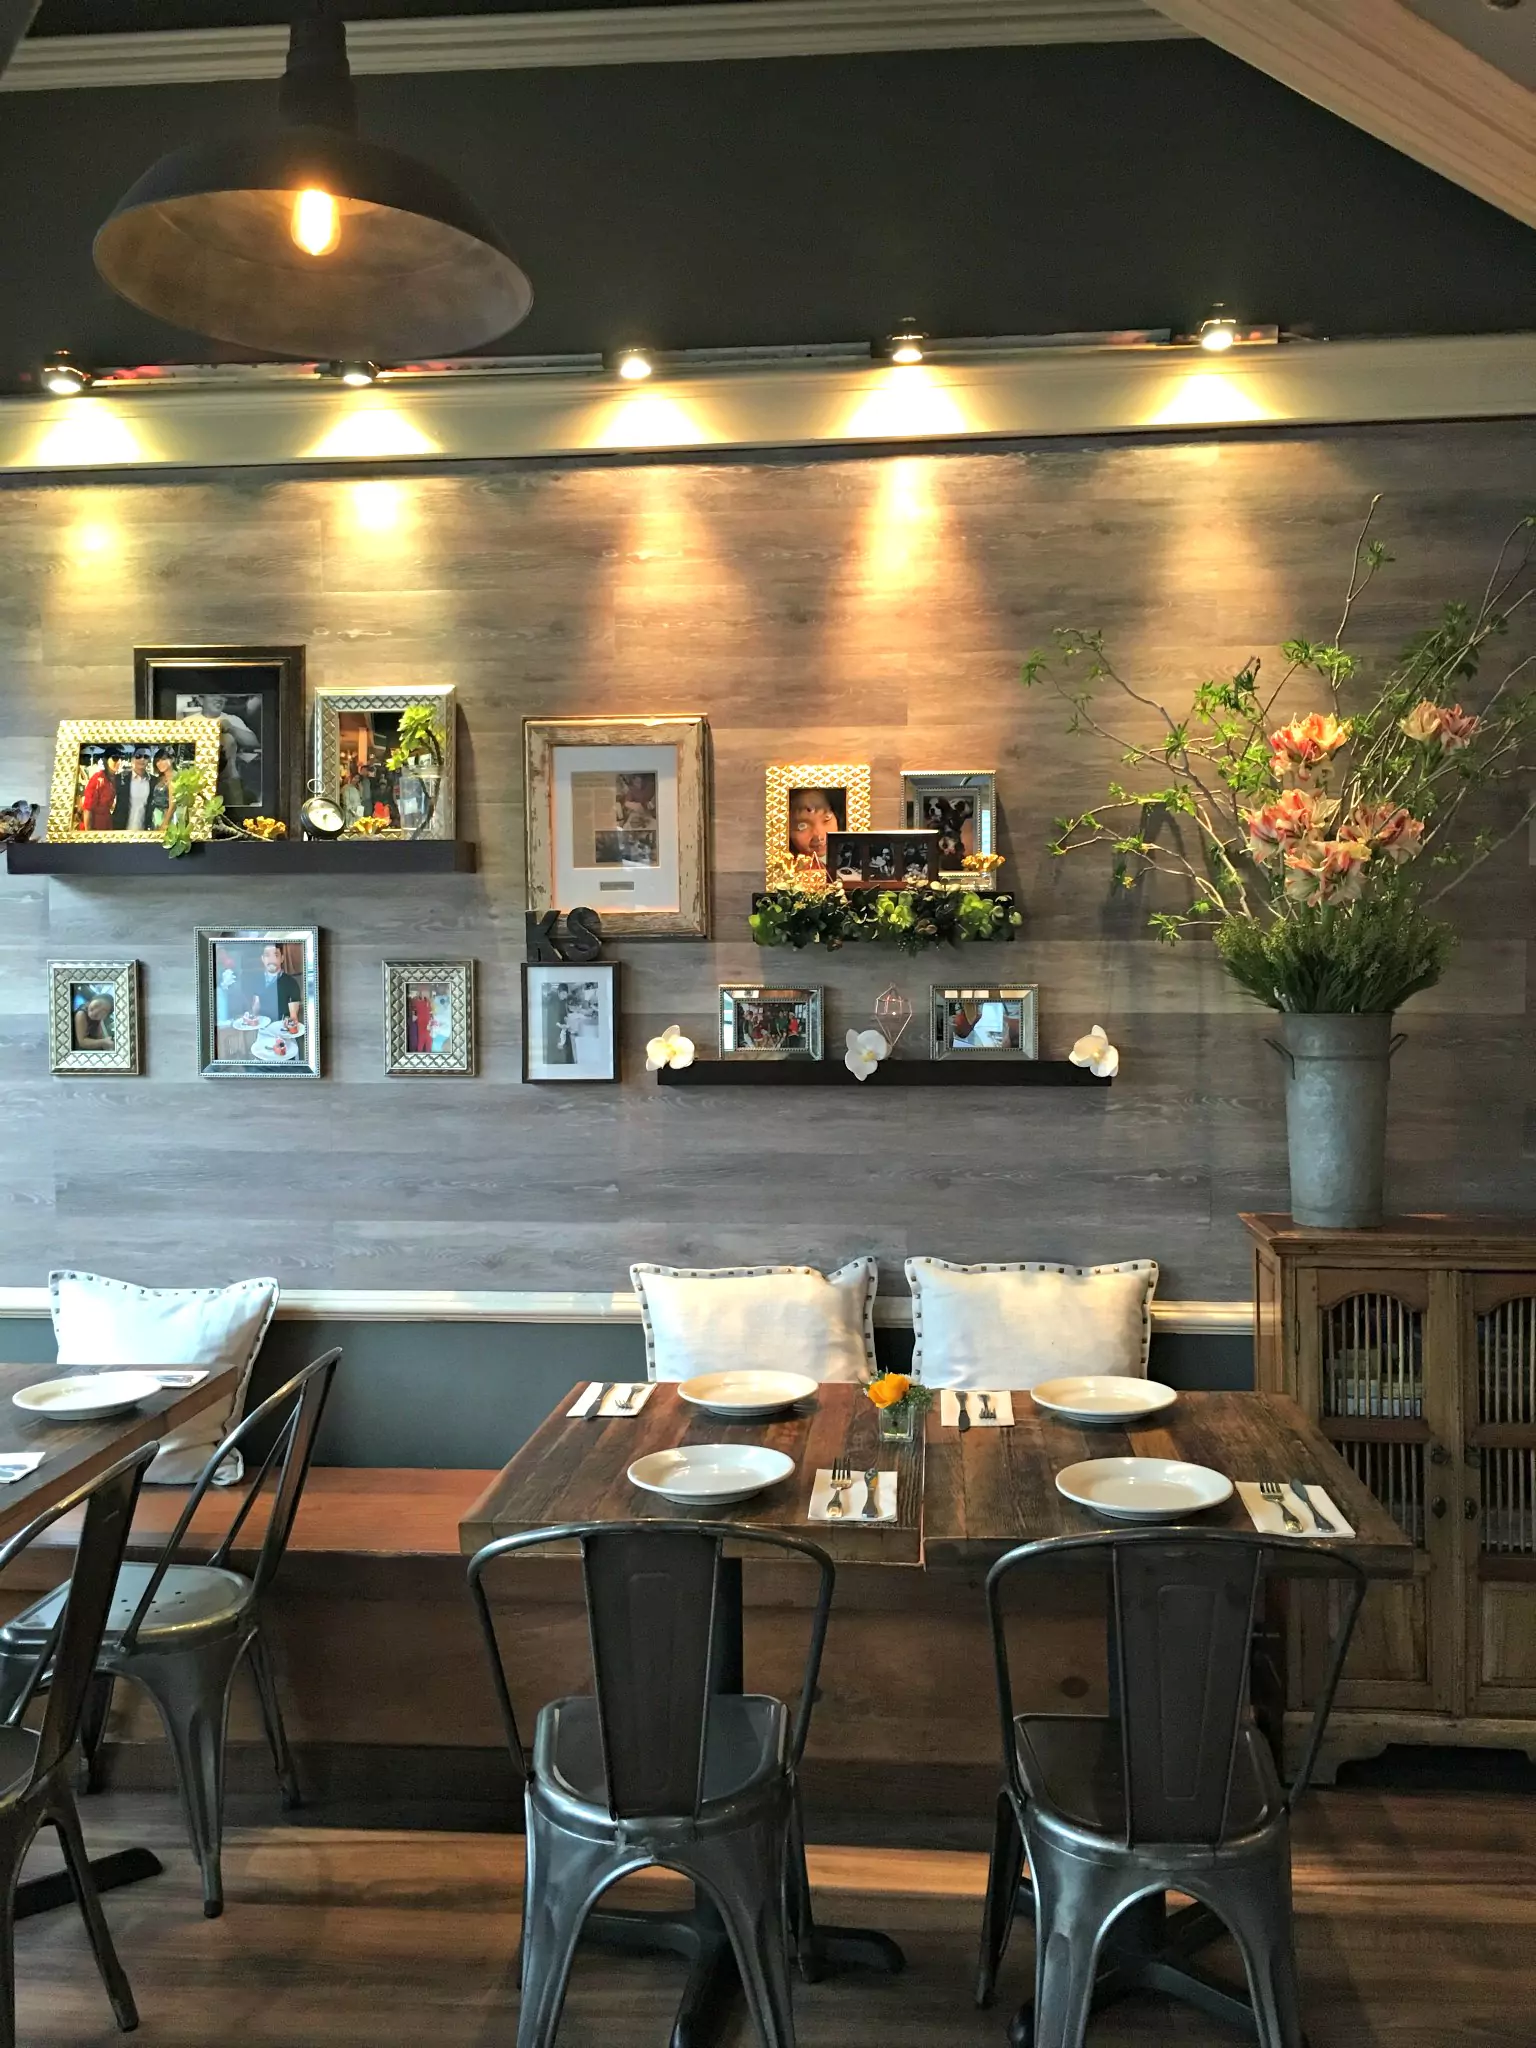 Cozy Dining and California Cuisine at Kitchen Story